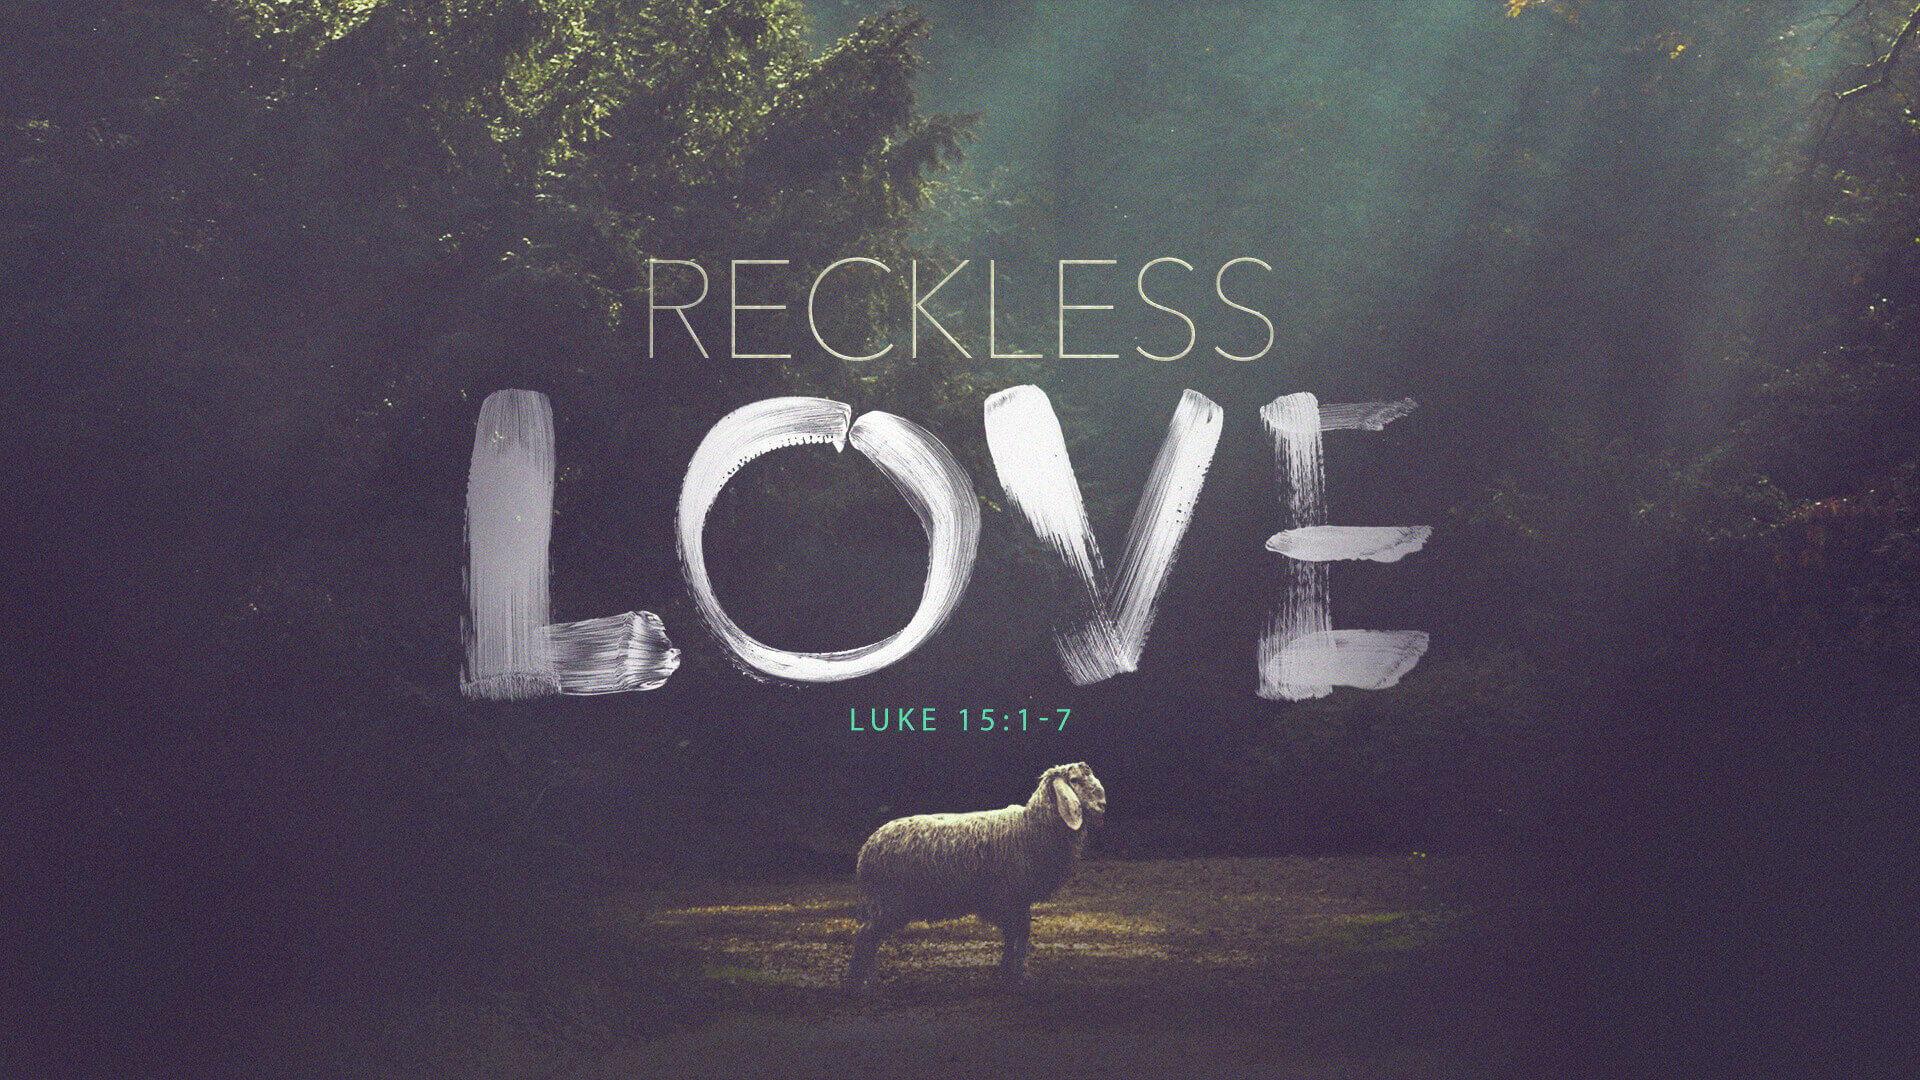 Reckless Love Wallpapers